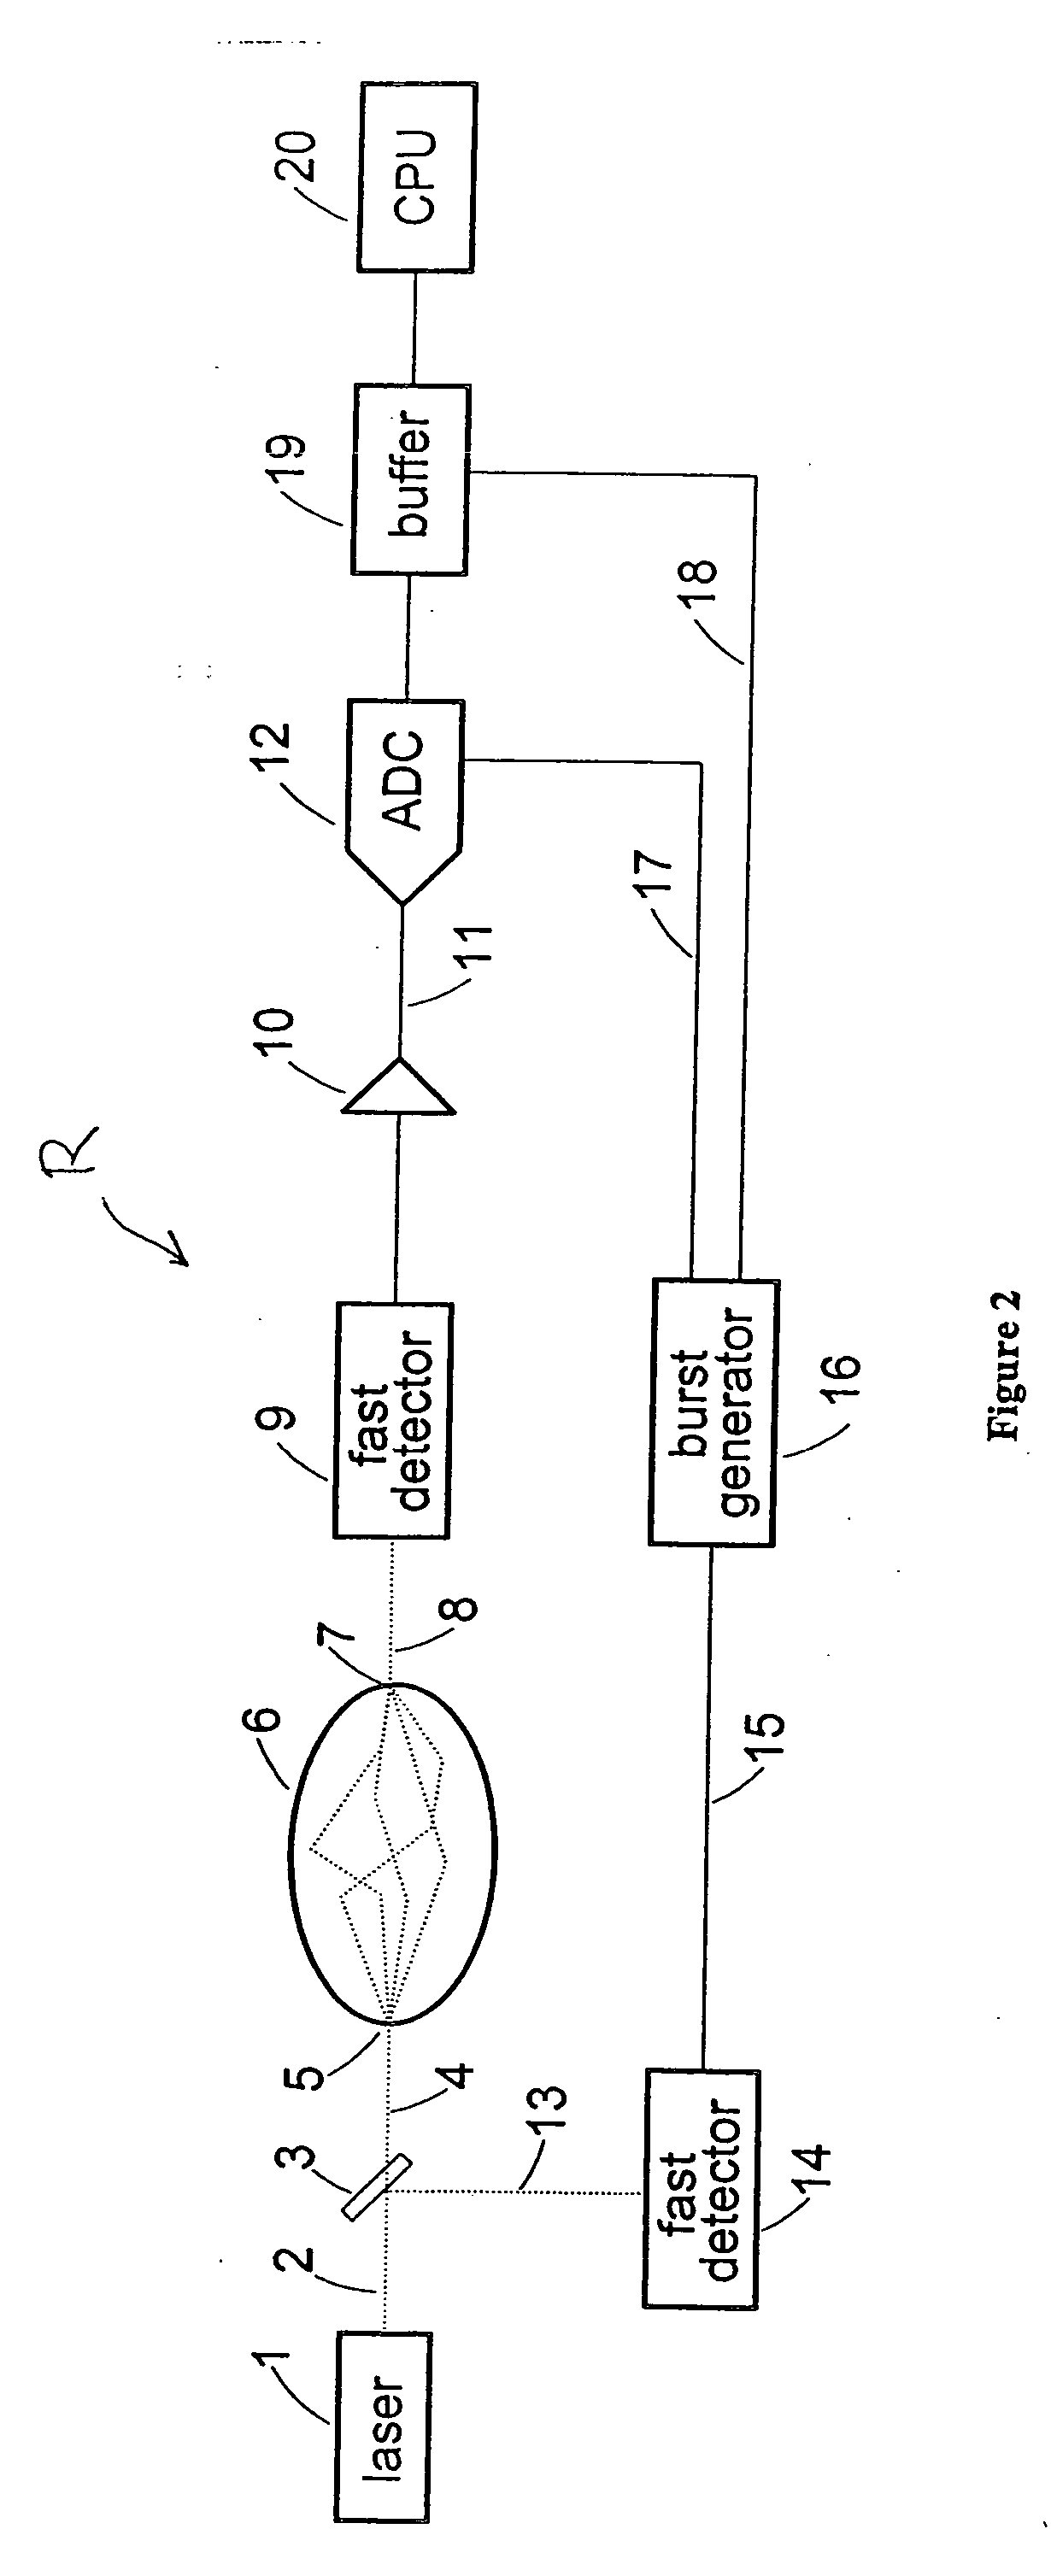 Apparatus and method for acquiring time-resolved measurements utilizing direct digitization of the temporal point spread function of the detected light